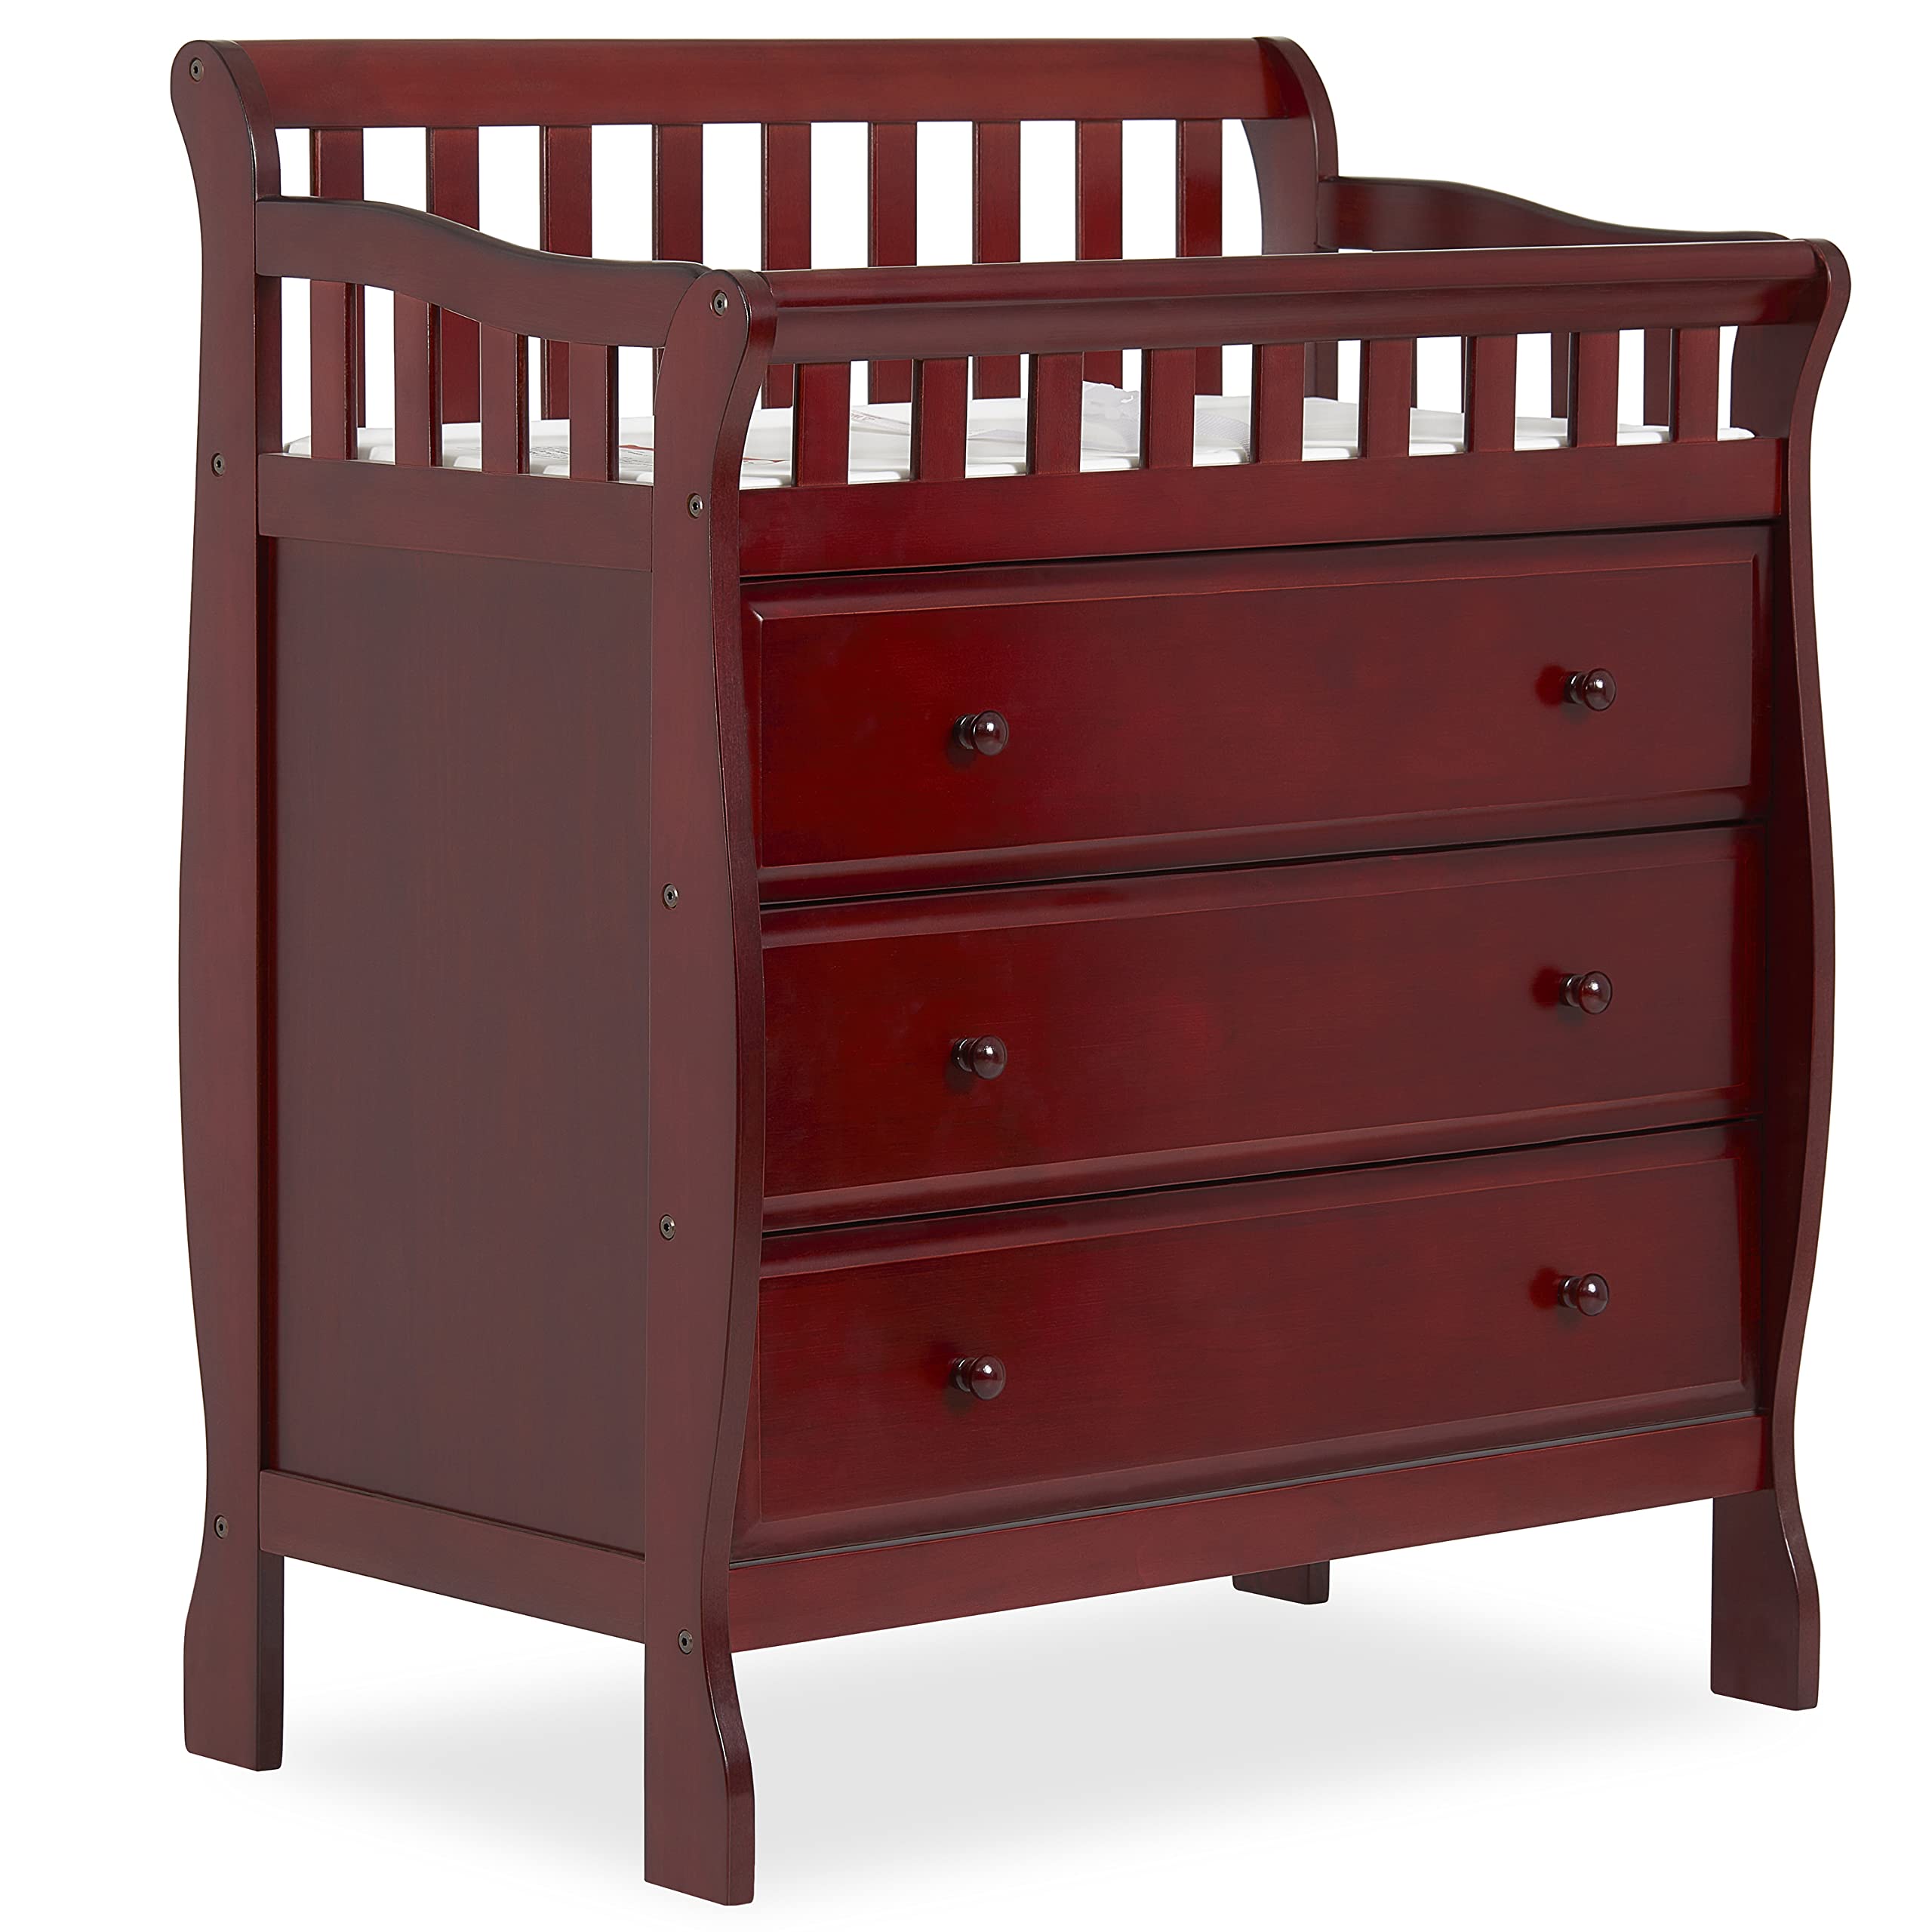 Dream On Me Marcus Changing Table And Dresser In Cherry, Features 3 Spacious Drawers, Non-Toxic Finishes, Comes With 1